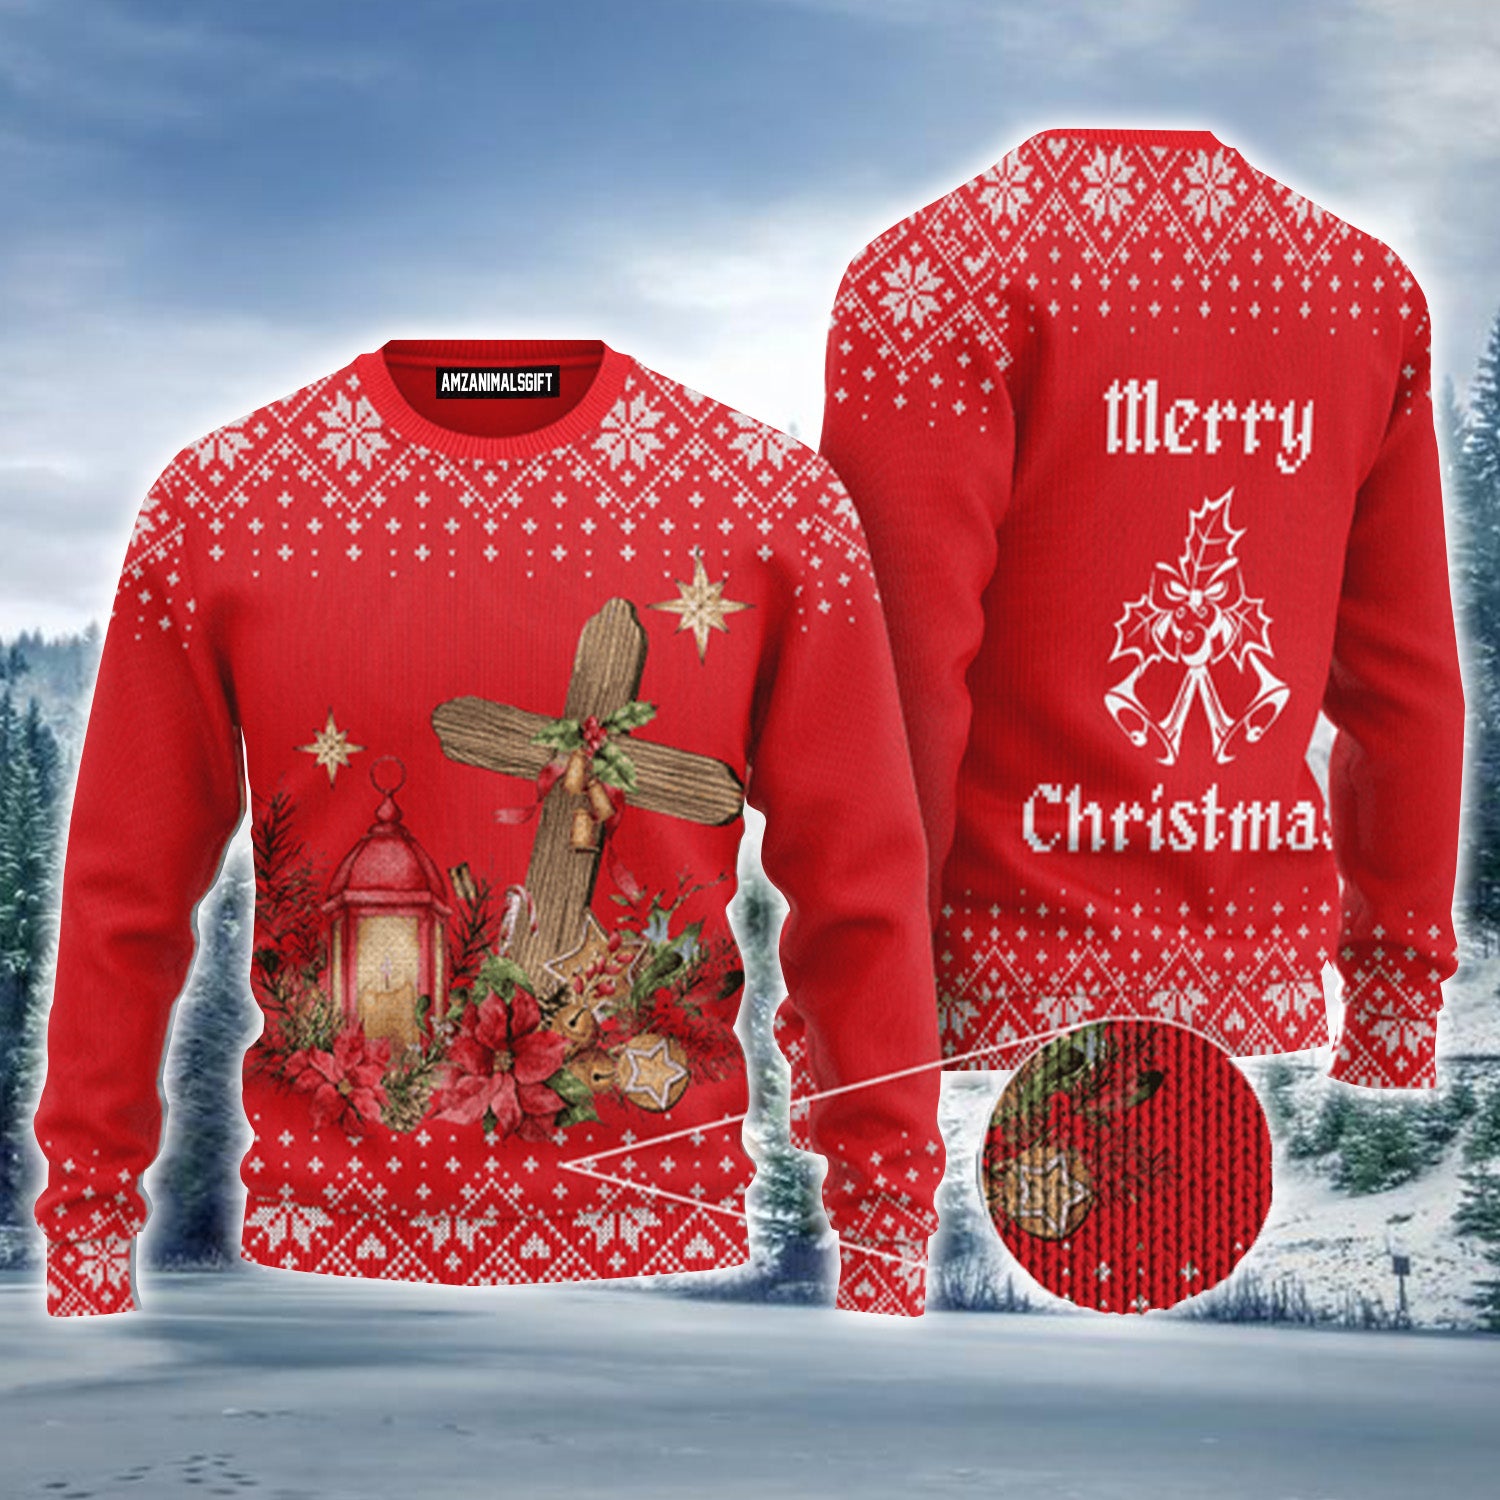 Merry Christmas Floral Cross Urly Sweater, Christmas Sweater For Men & Women - Perfect Gift For New Year, Winter, Christmas